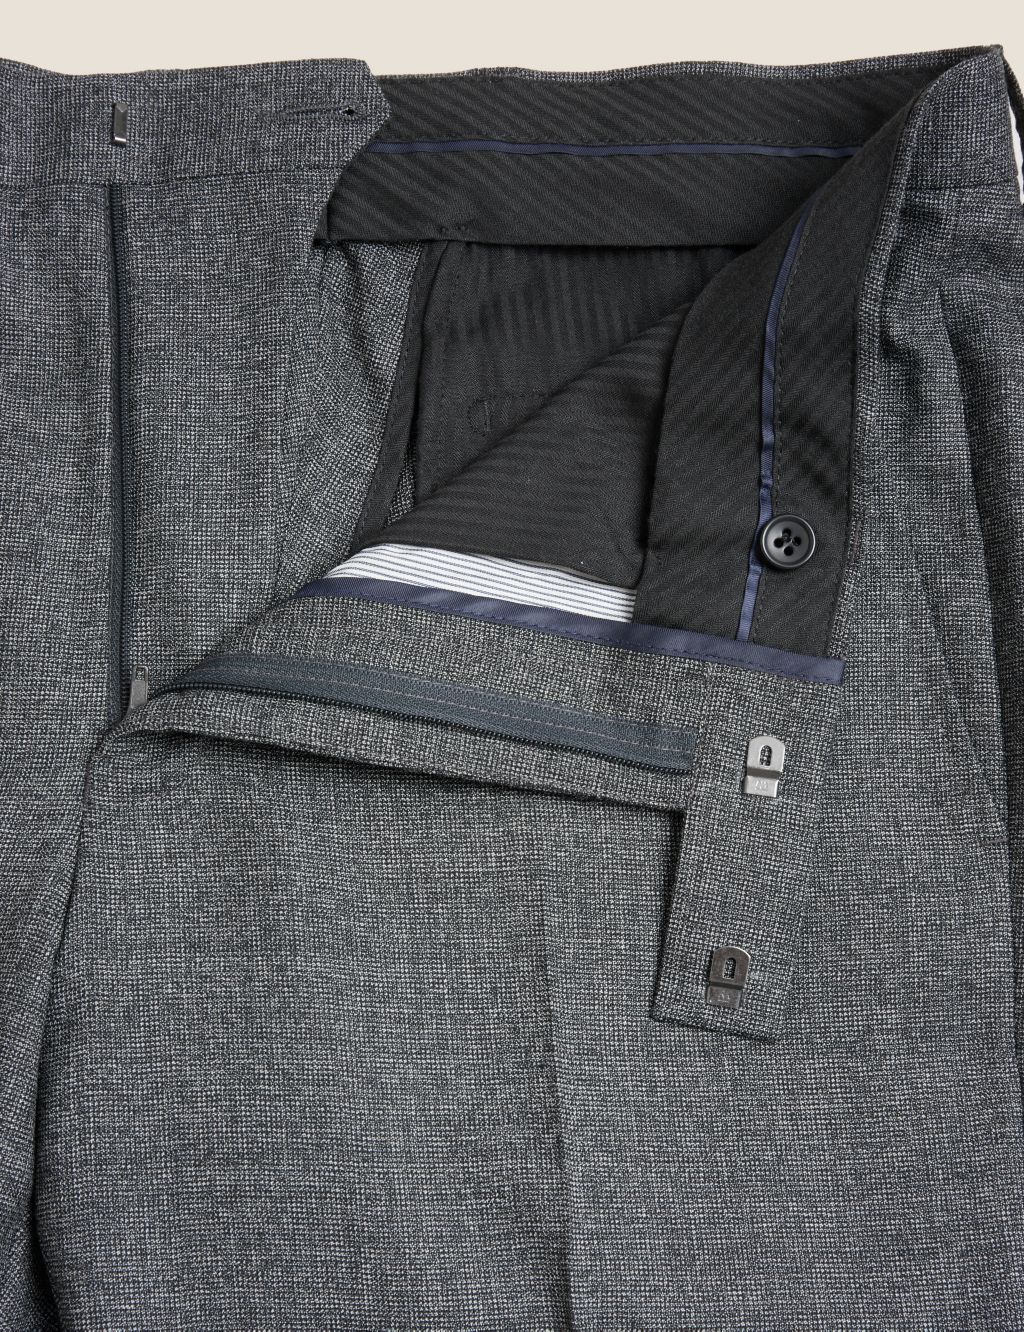 Tailored Fit Pure Wool Suit Trousers image 7